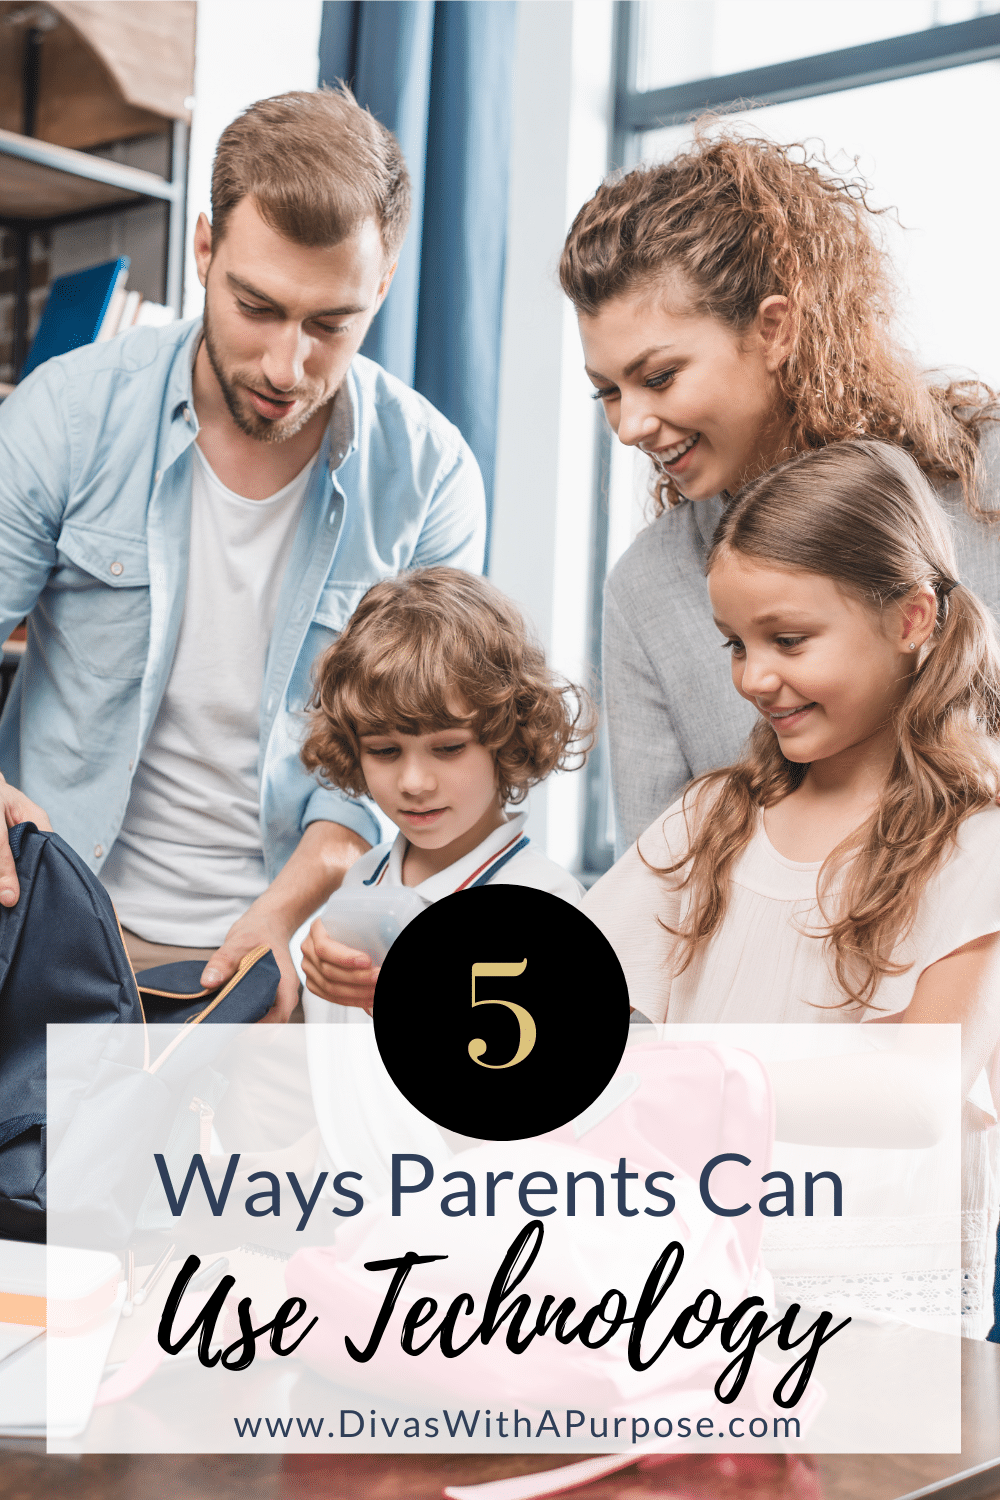 Nowadays, technology can give parents a helping hand when it comes to raising children. From raising giggly toddlers to dealing with the terrible teens, this article shares ways technology is helping parents. 5 Ways Parents Can Use Technology